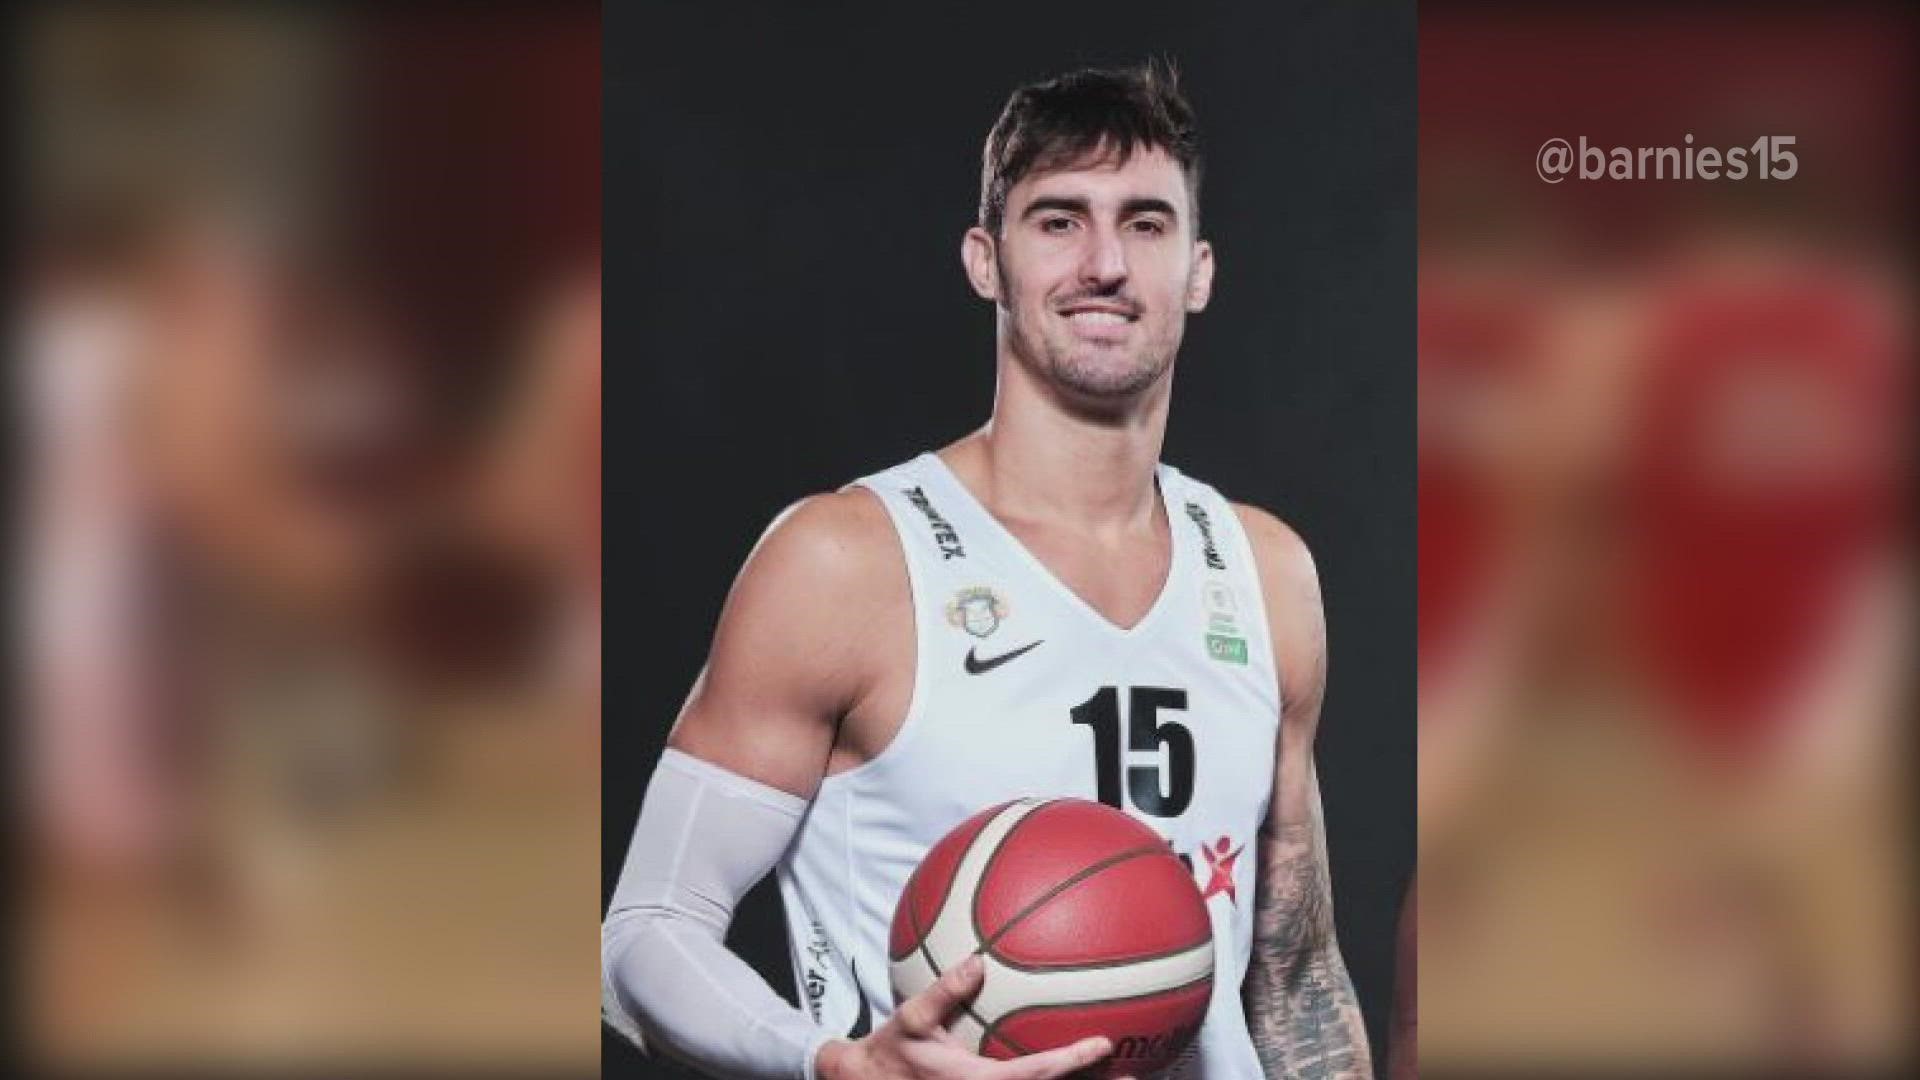 Auburn's Troy Barnies is playing in Estonia this season after he had to flee Ukraine when Russia invaded the country.